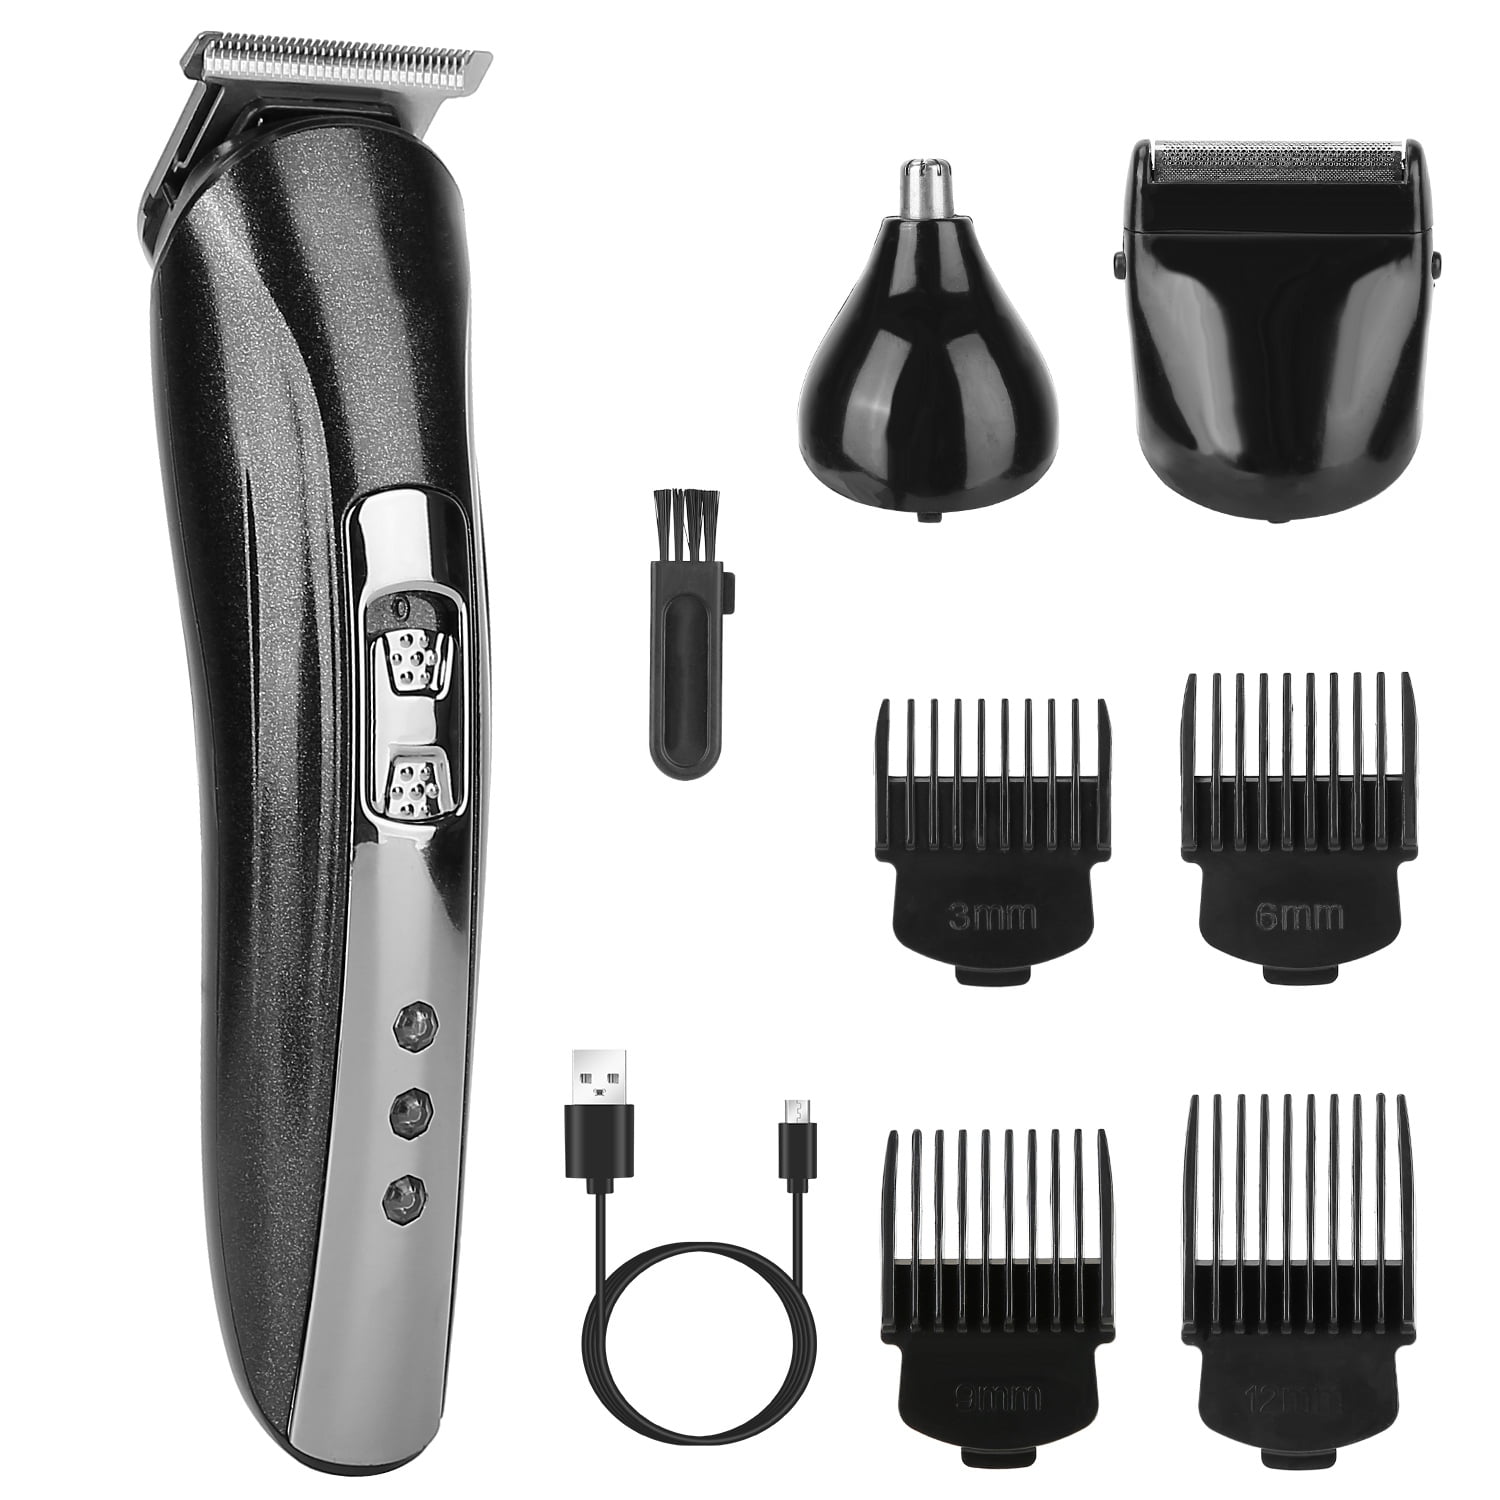 iMountek 3 in 1 Rechargeable Hair Clipper Cordless Hair Trimmer Shaver  Electric Razor Beard Trimmer Nose Hair Trimmer 